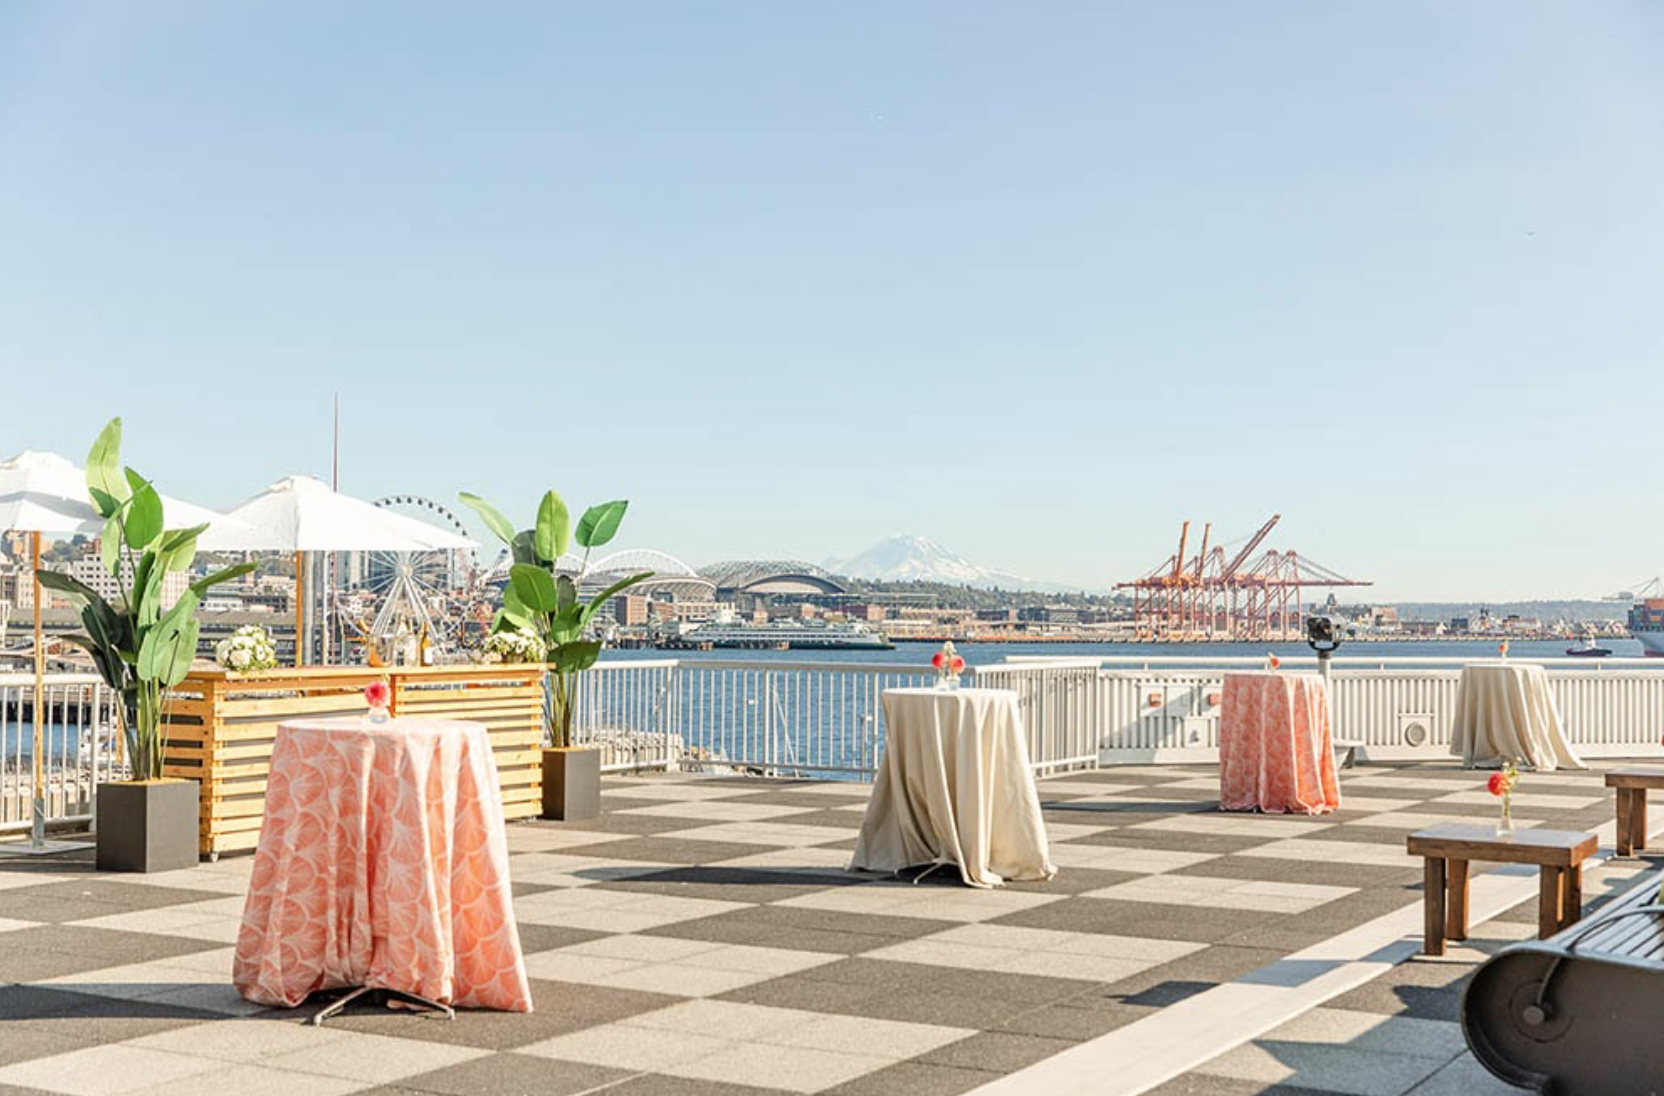 11 Spectacular Waterfront Venues In Seattle For Your Next Event